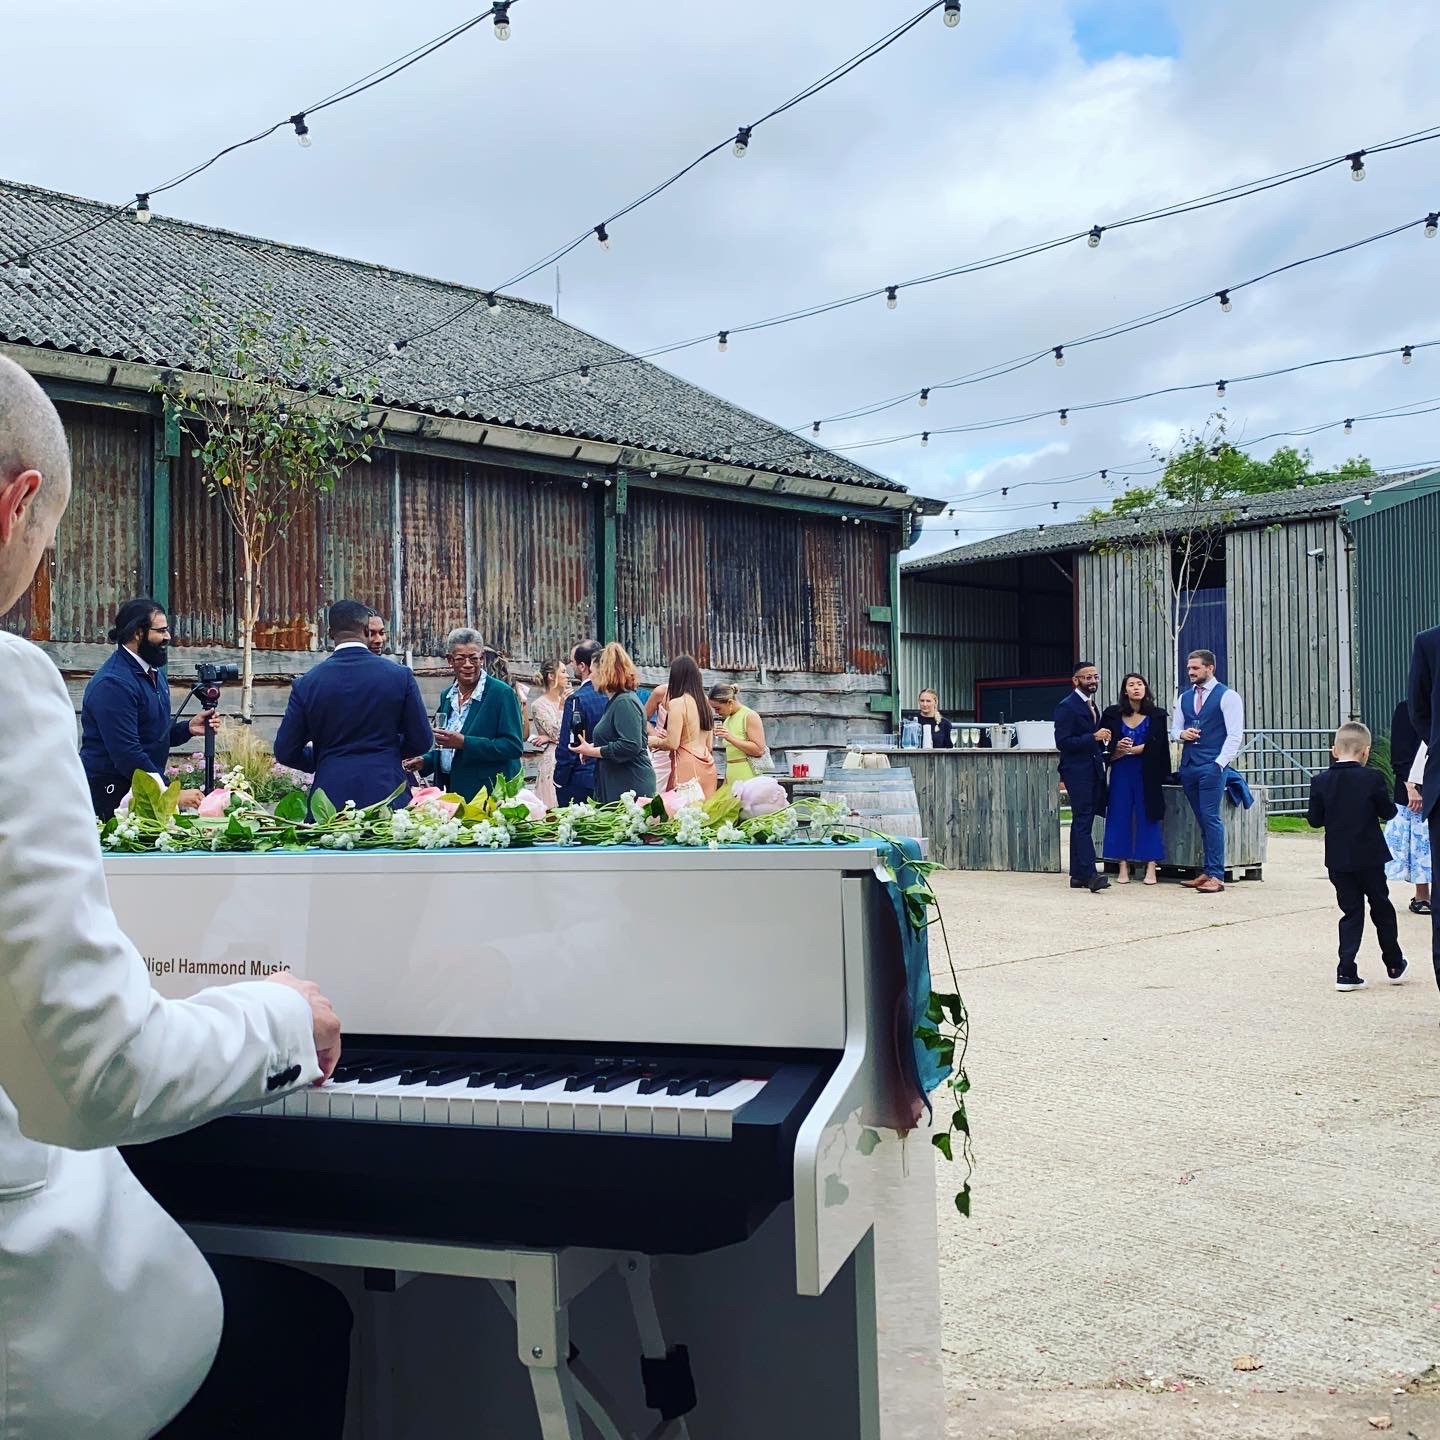 Mobile piano moved from barn to outdoors within 5 minutes